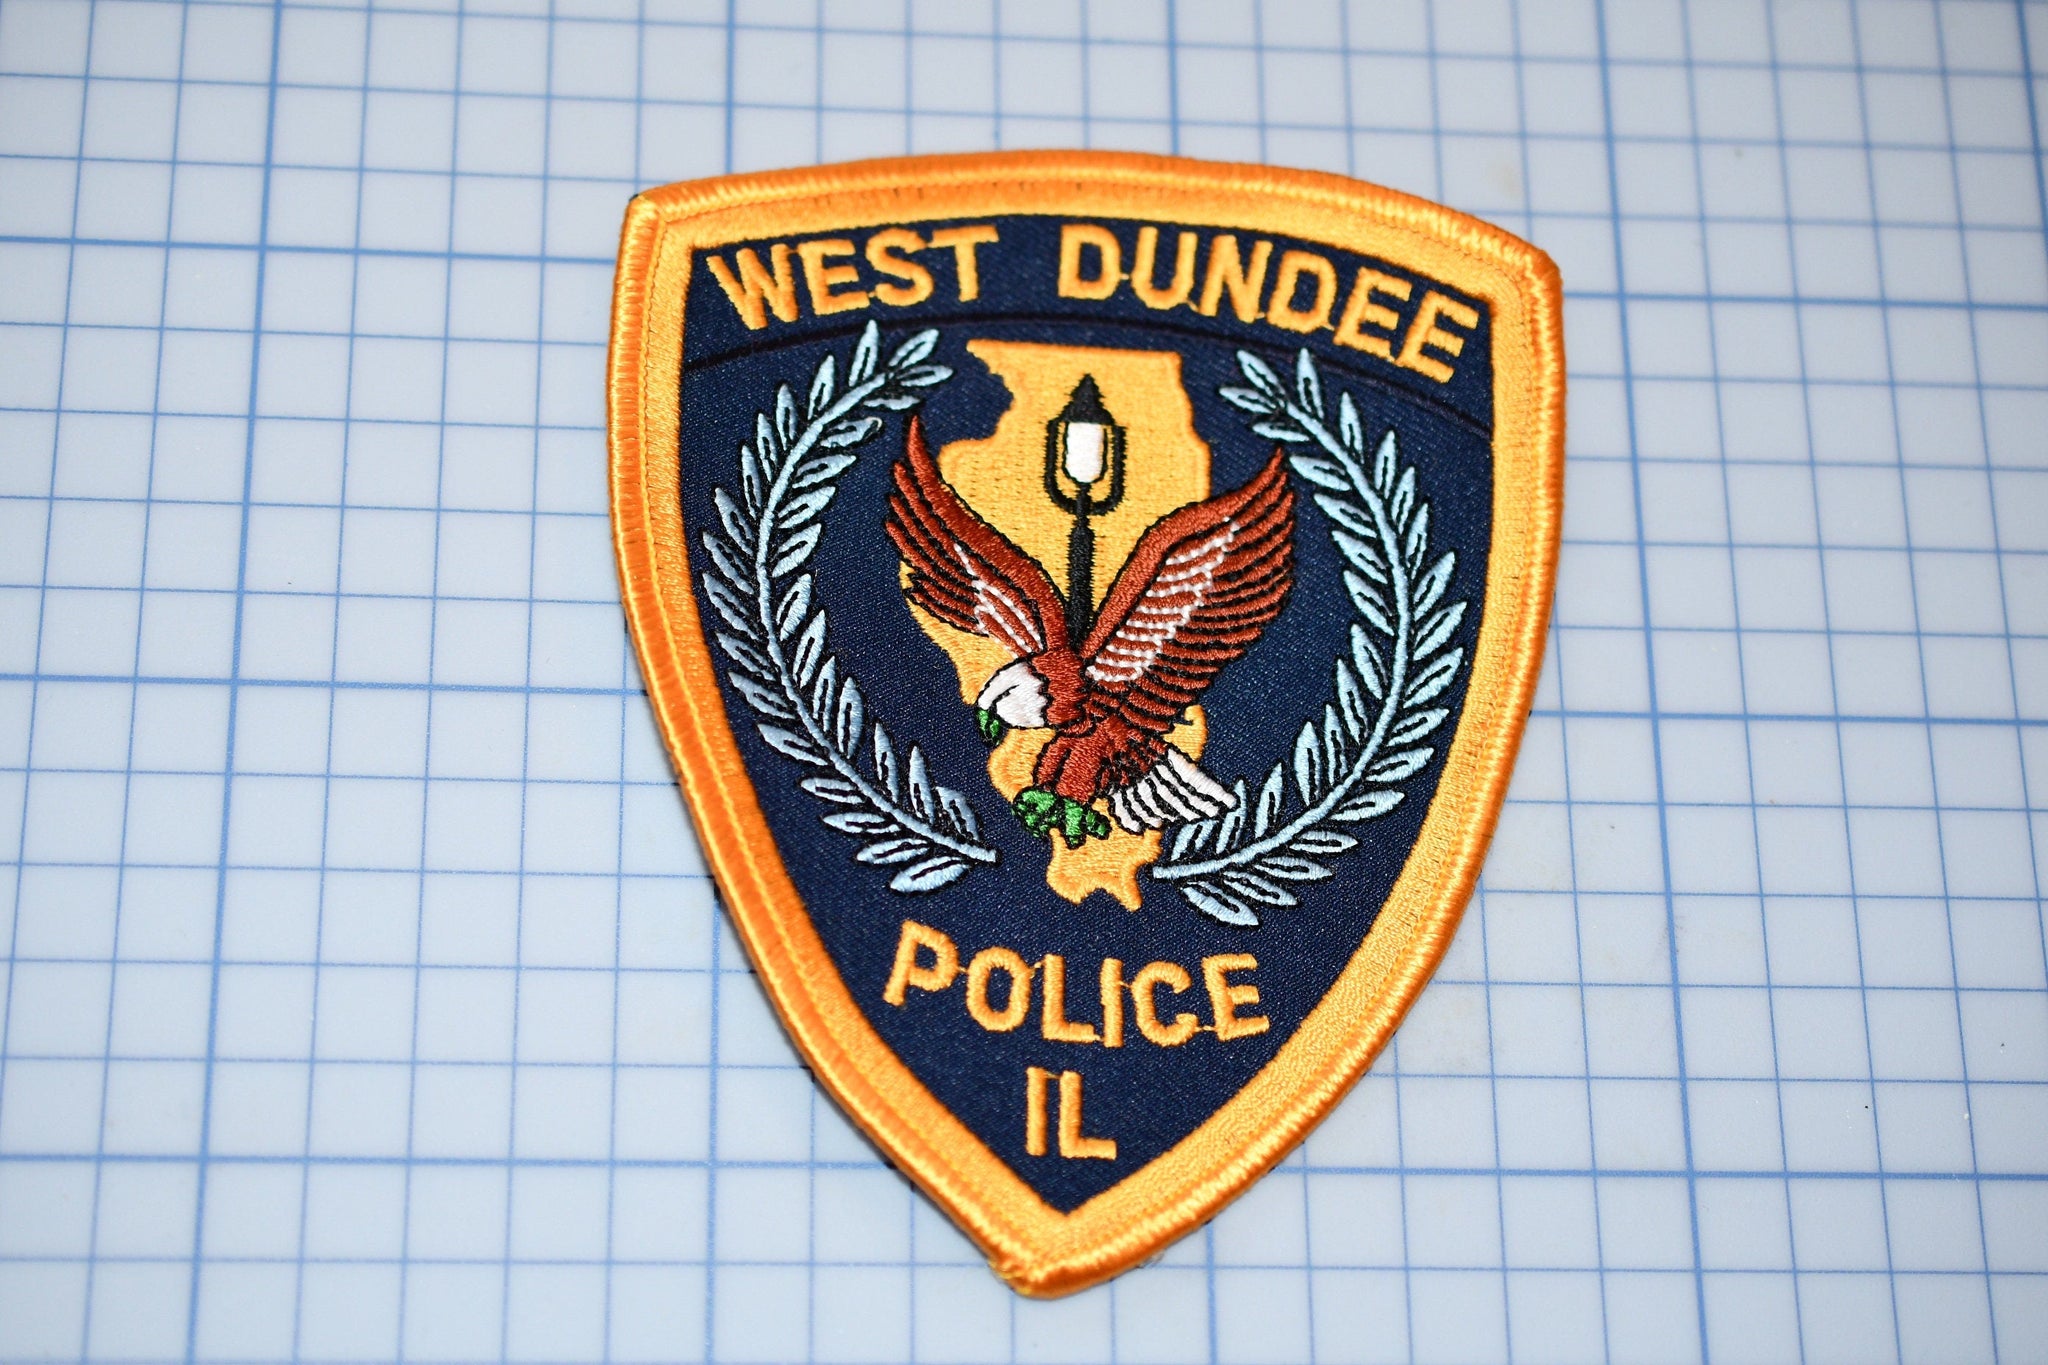 West Dundee Illinois Police Patch (S3-271)